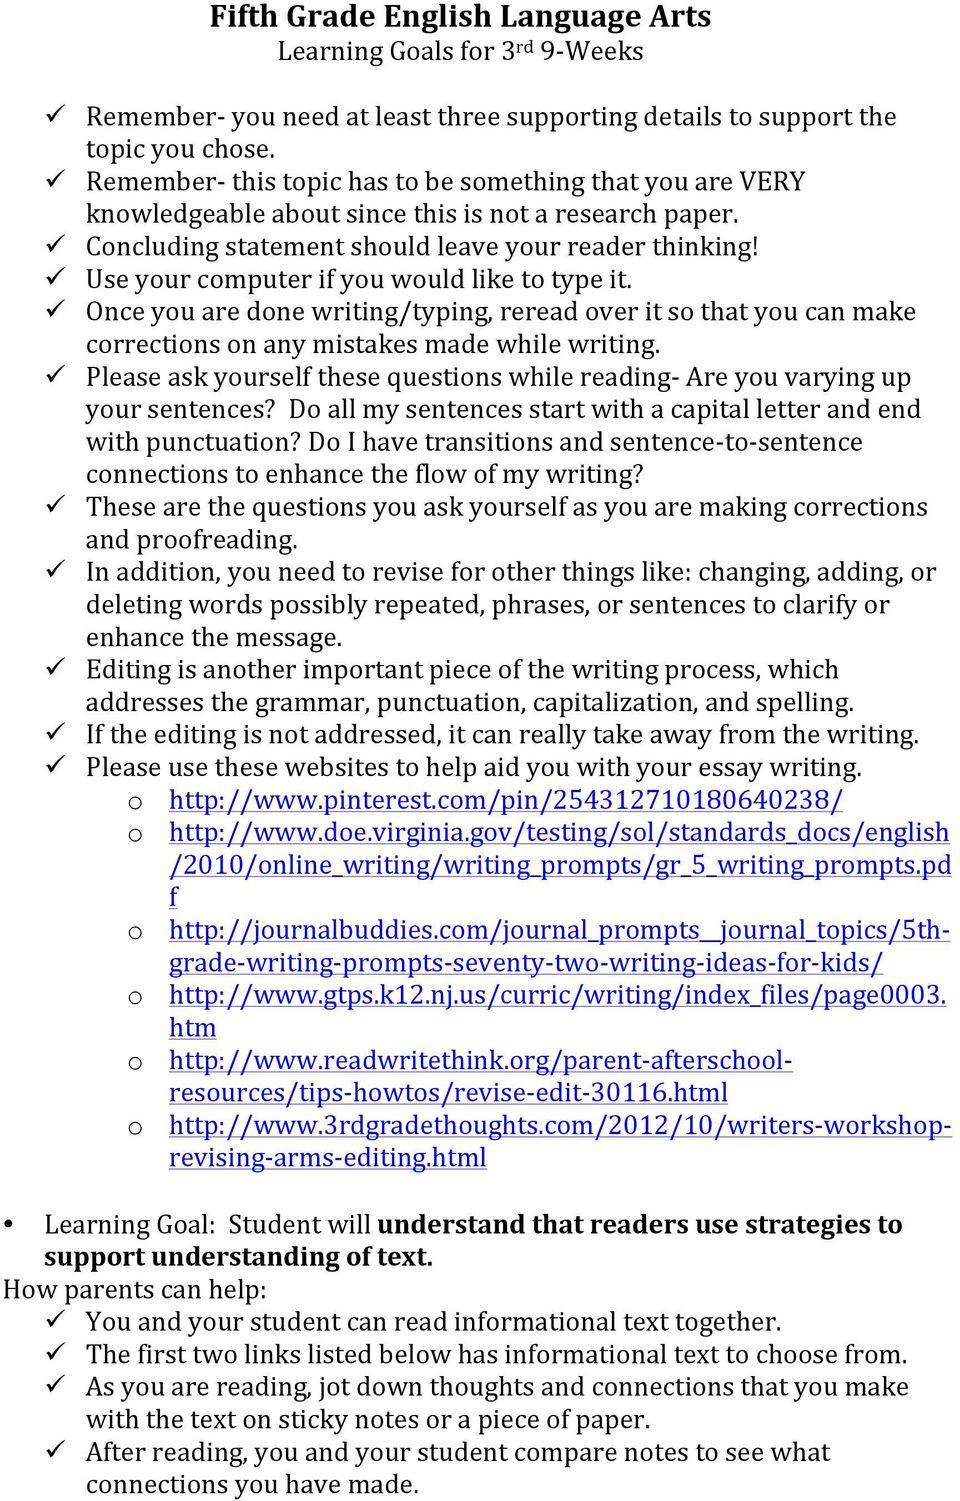 Once you are done writing/typing, reread over it so that you can make corrections on any mistakes made while writing.